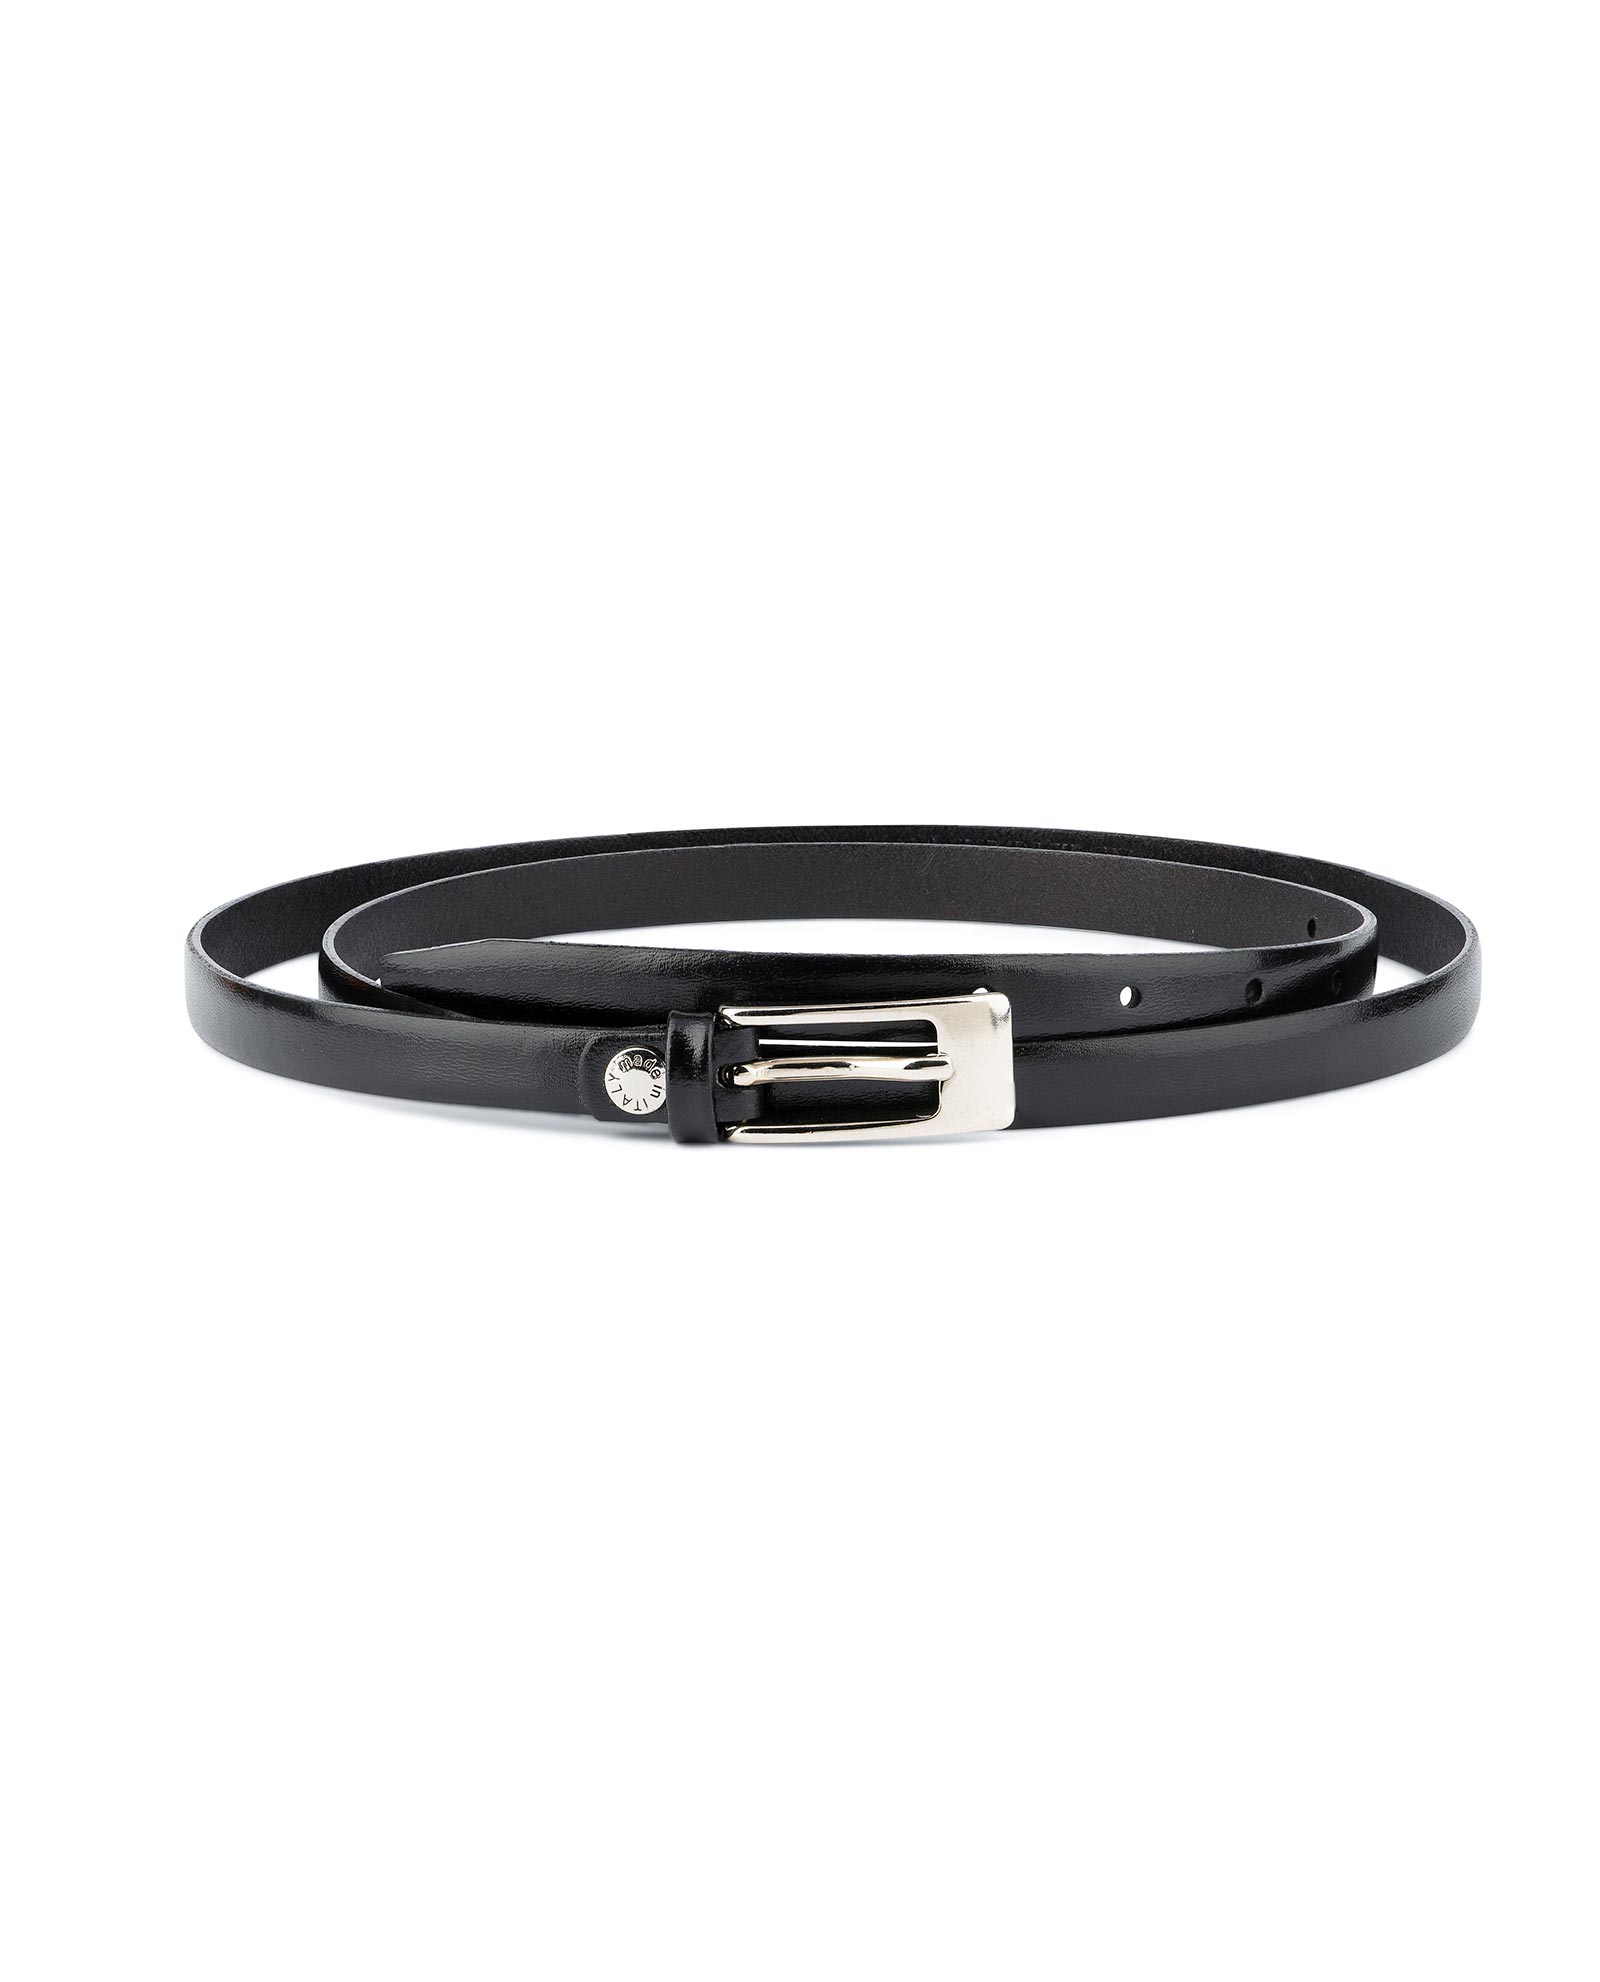 Buy Womens Leather Belt For Dress | Black With Silver Buckle | Capo Pelle